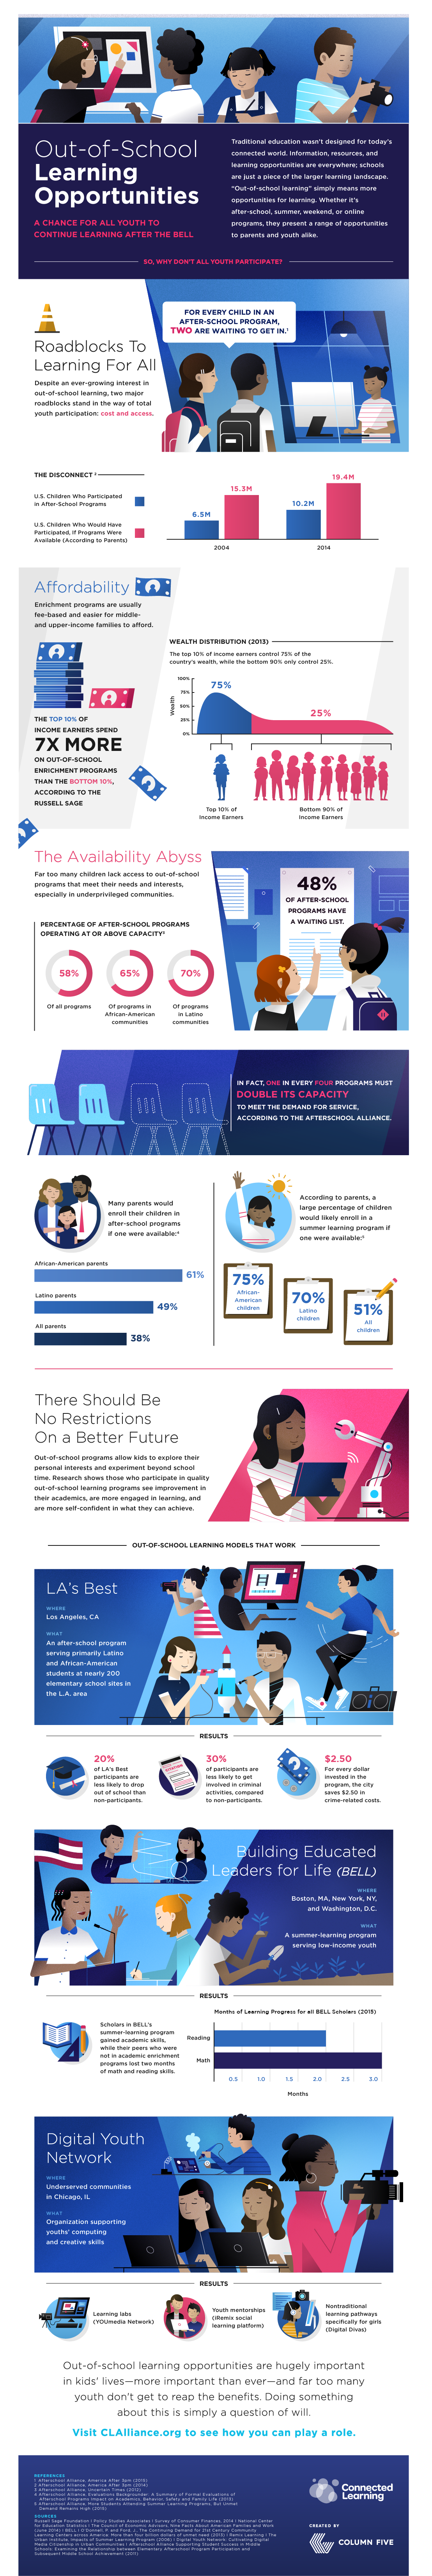 Infographic: Educational equity and out-of-school learning